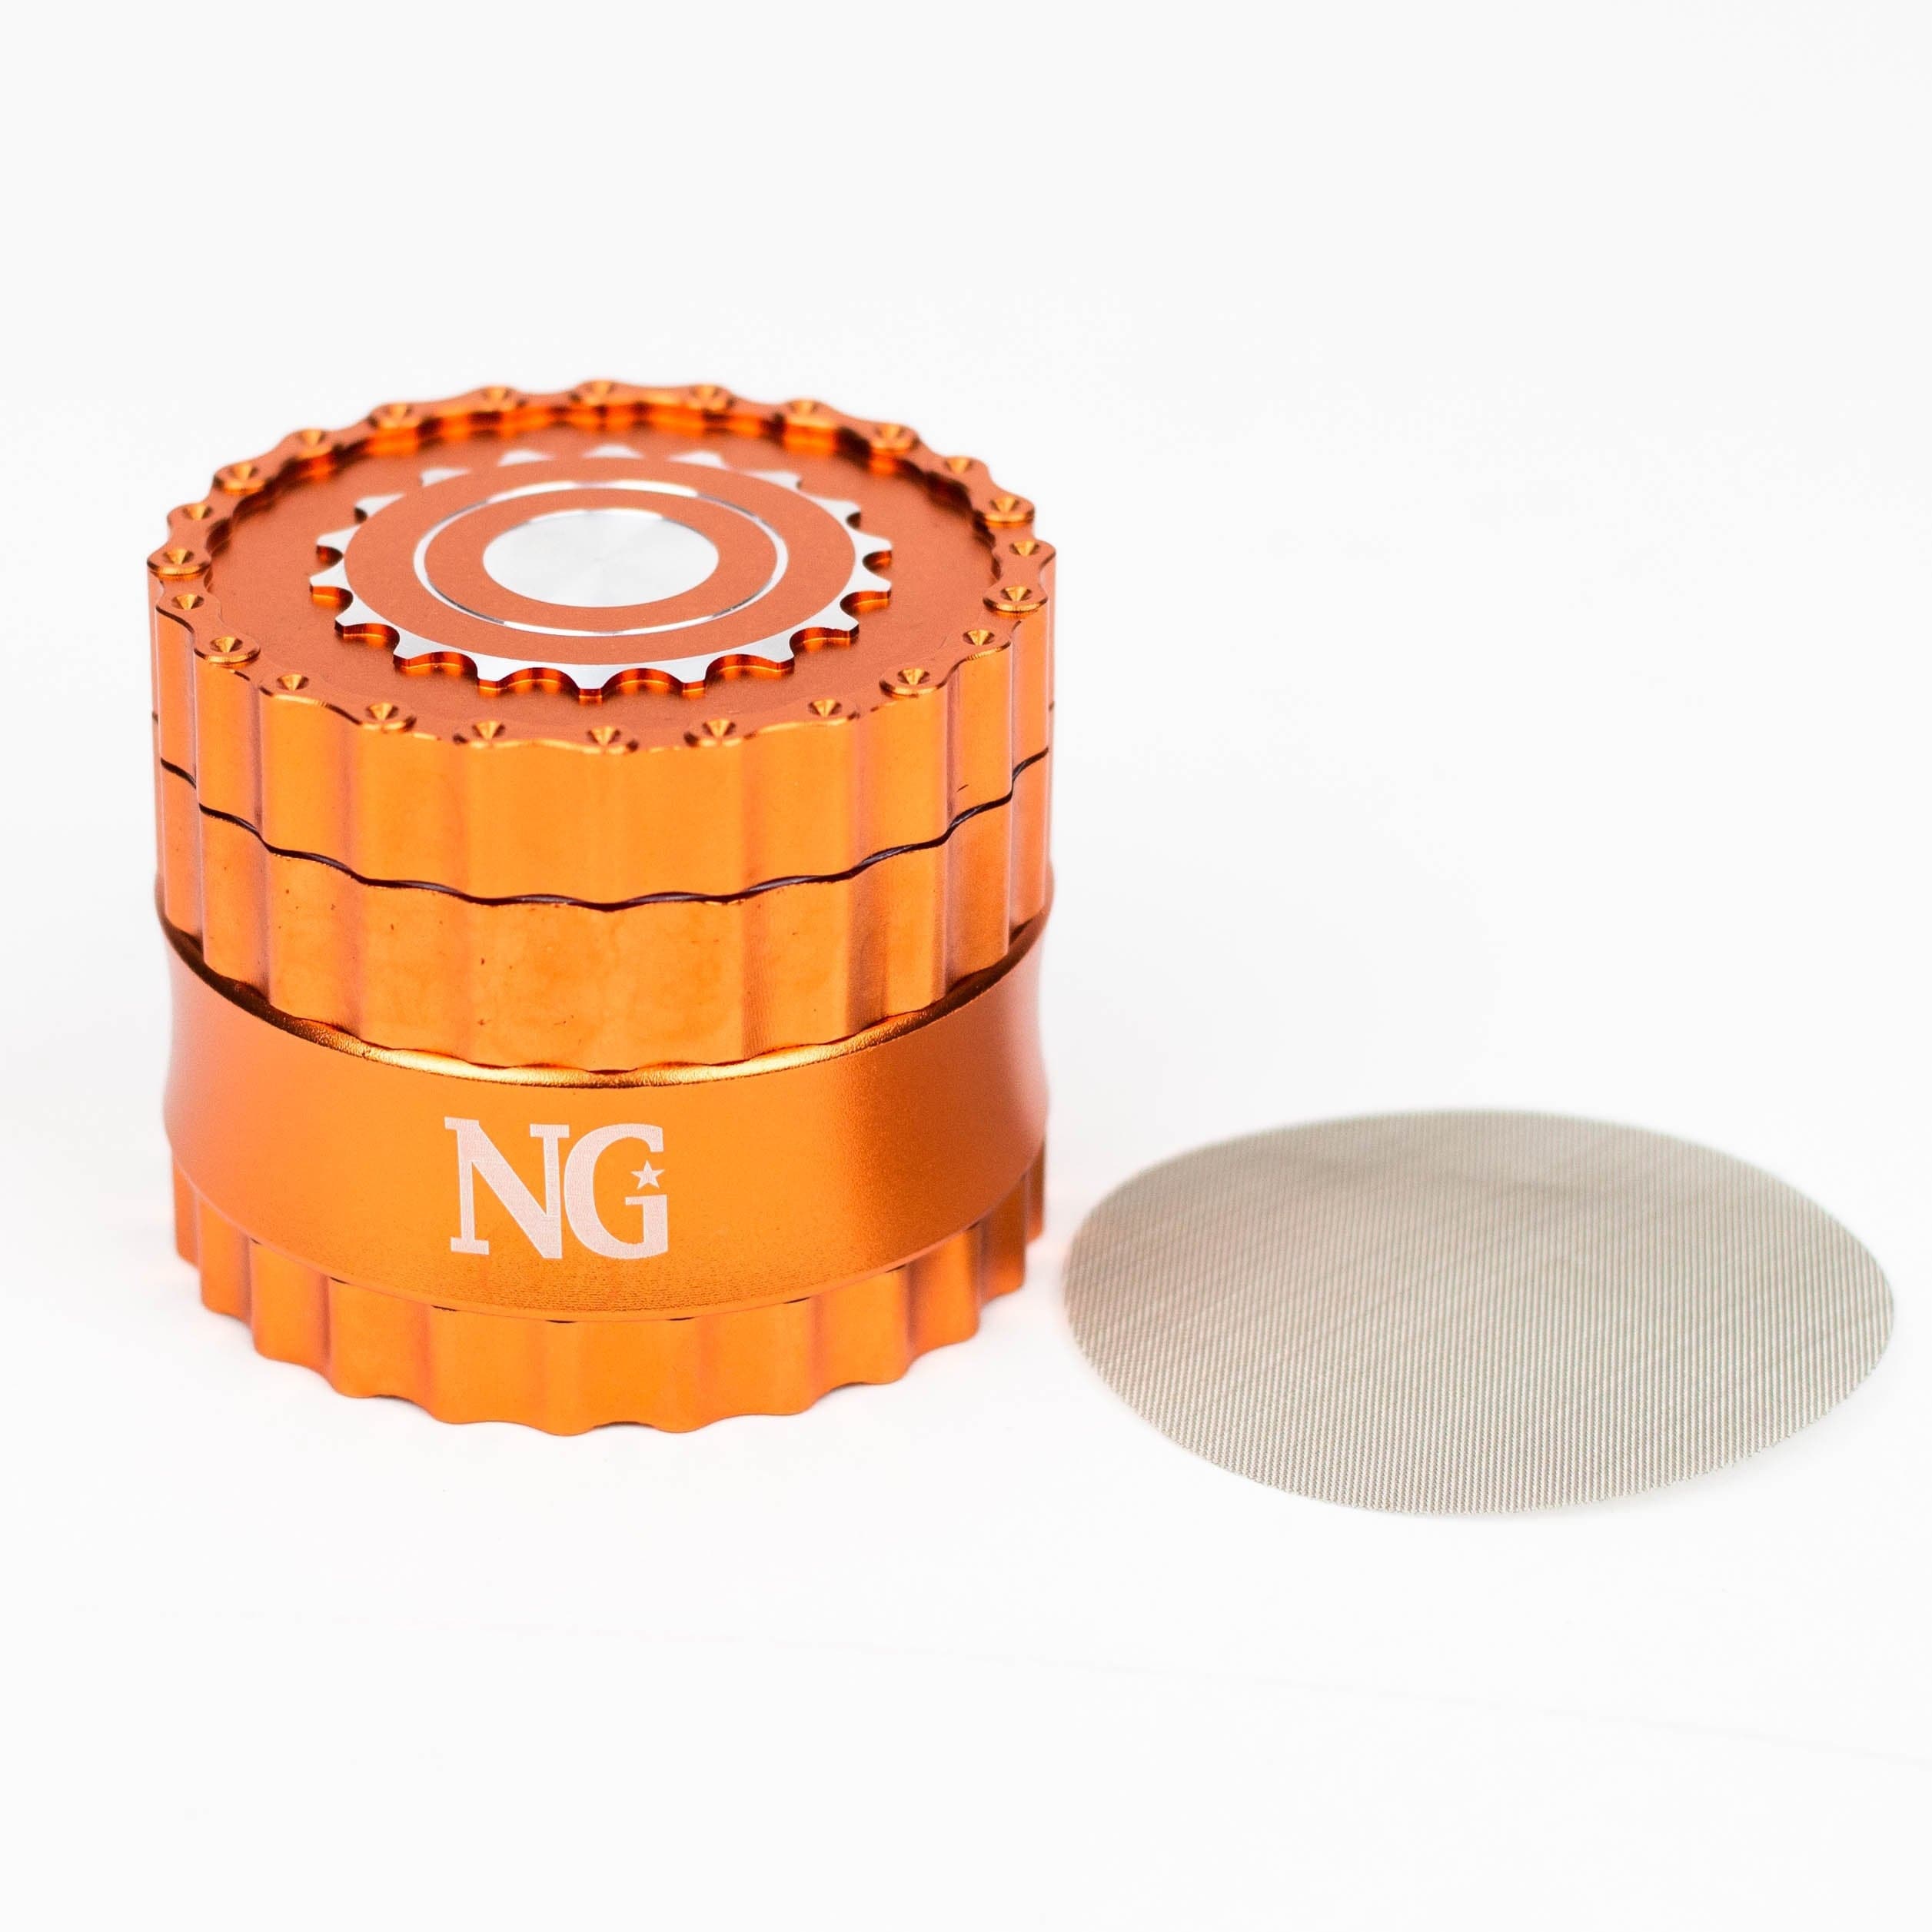 NG 4 Piece Chain & Gear Grinder_2